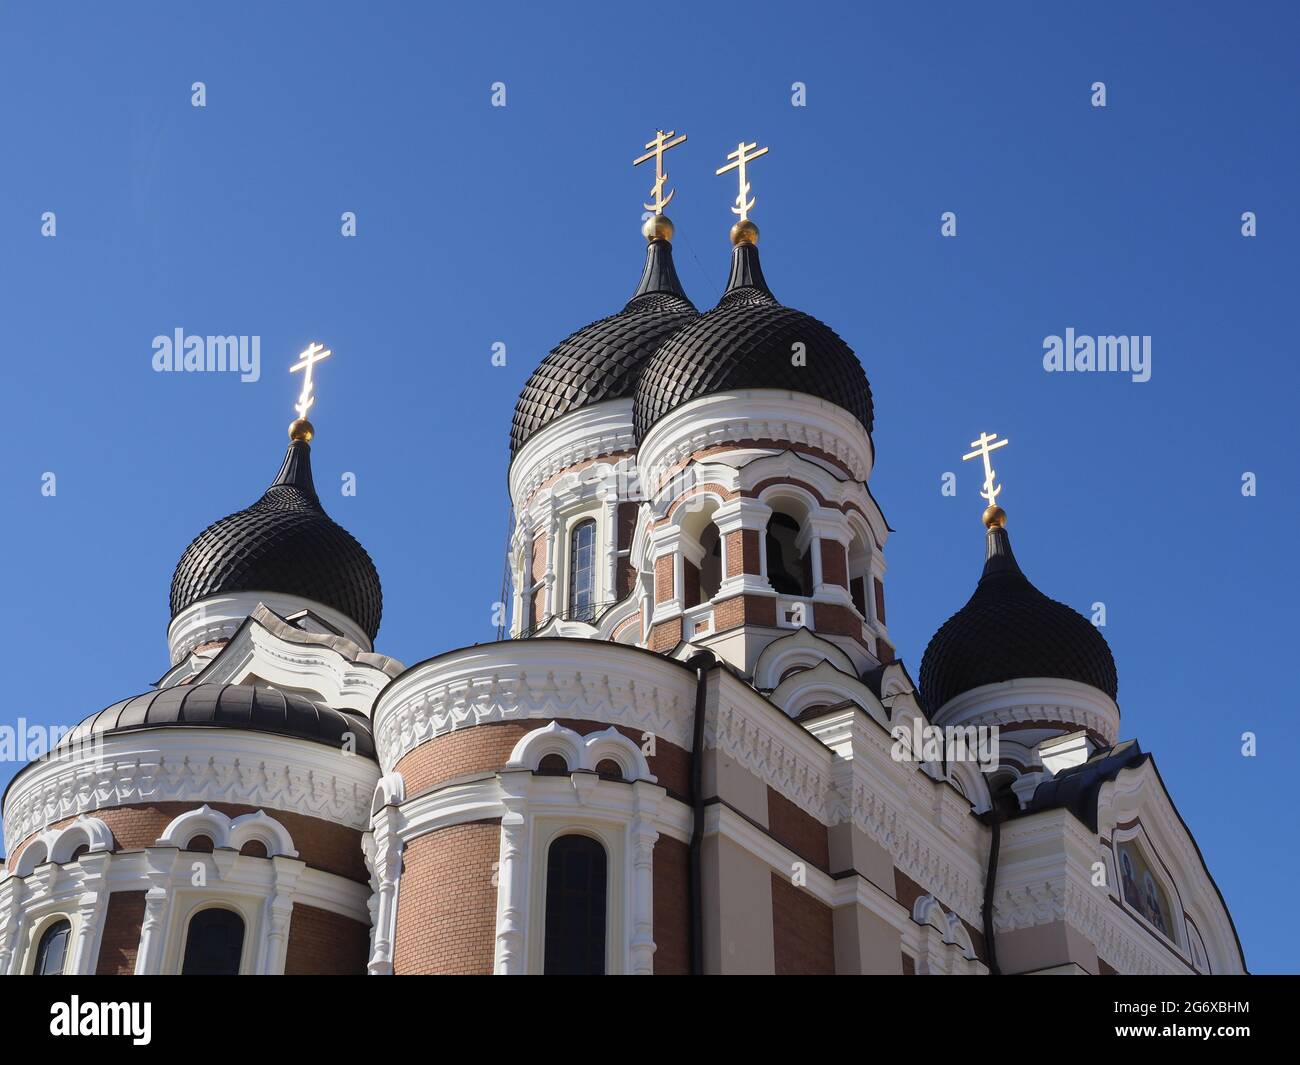 Alexander Nevsky Cathedral, Tallinn. Close up of the black domed roof against bright blue sky Stock Photo